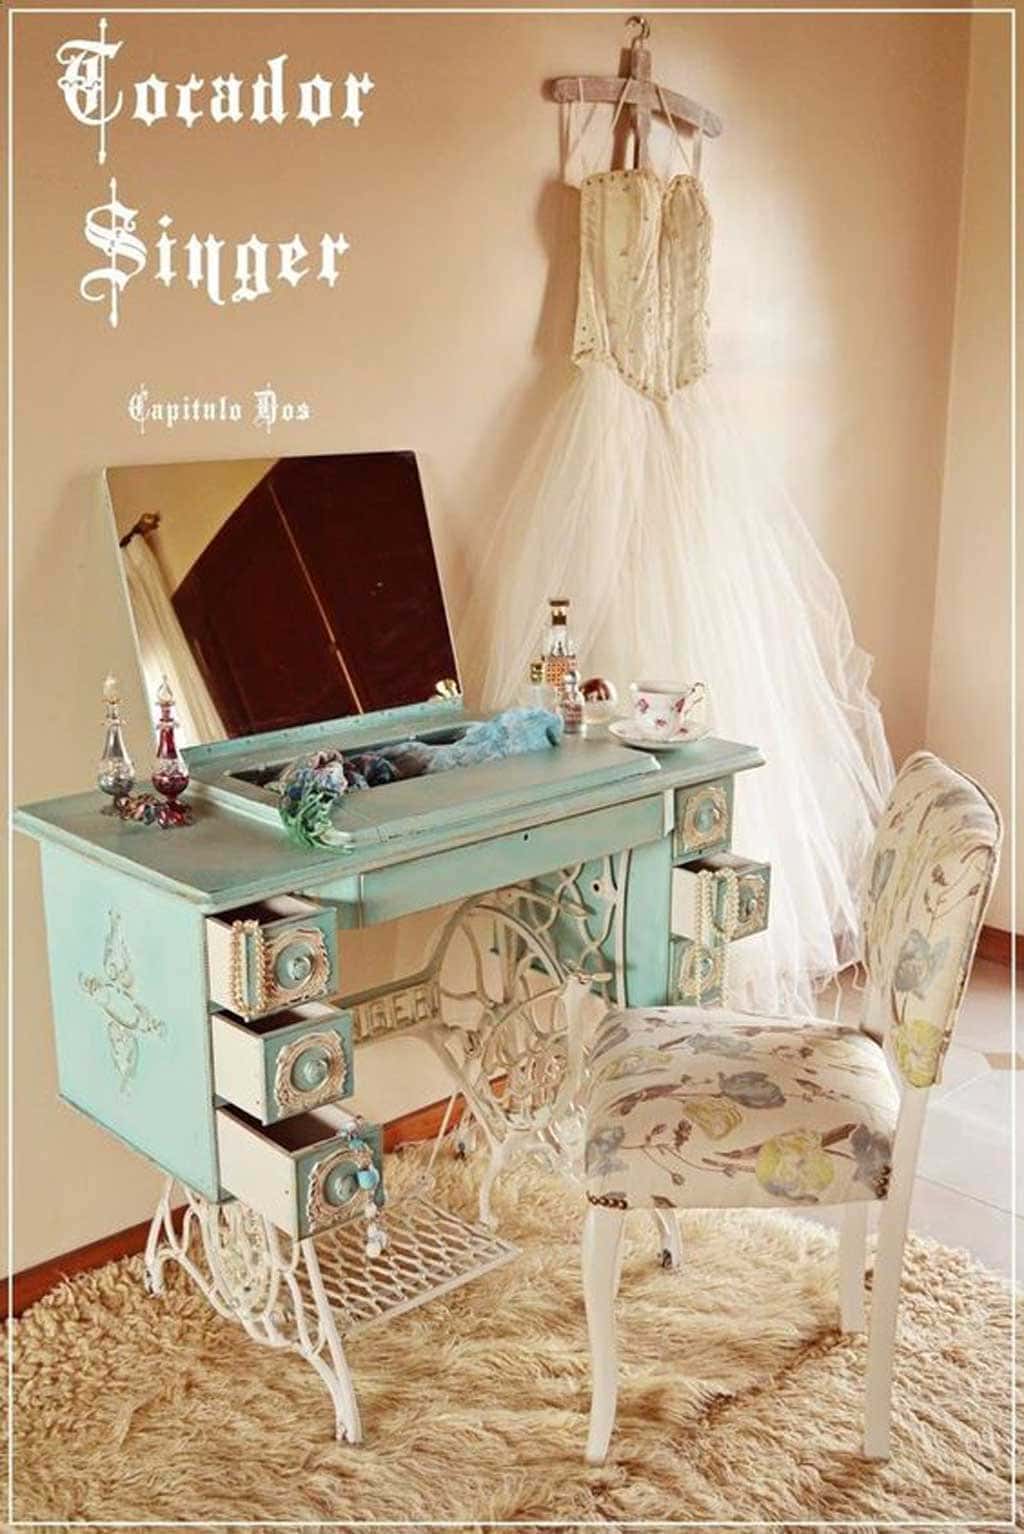 6. Turn an Old Sewing Machine into a Chic Dressing Table By Simphome.com